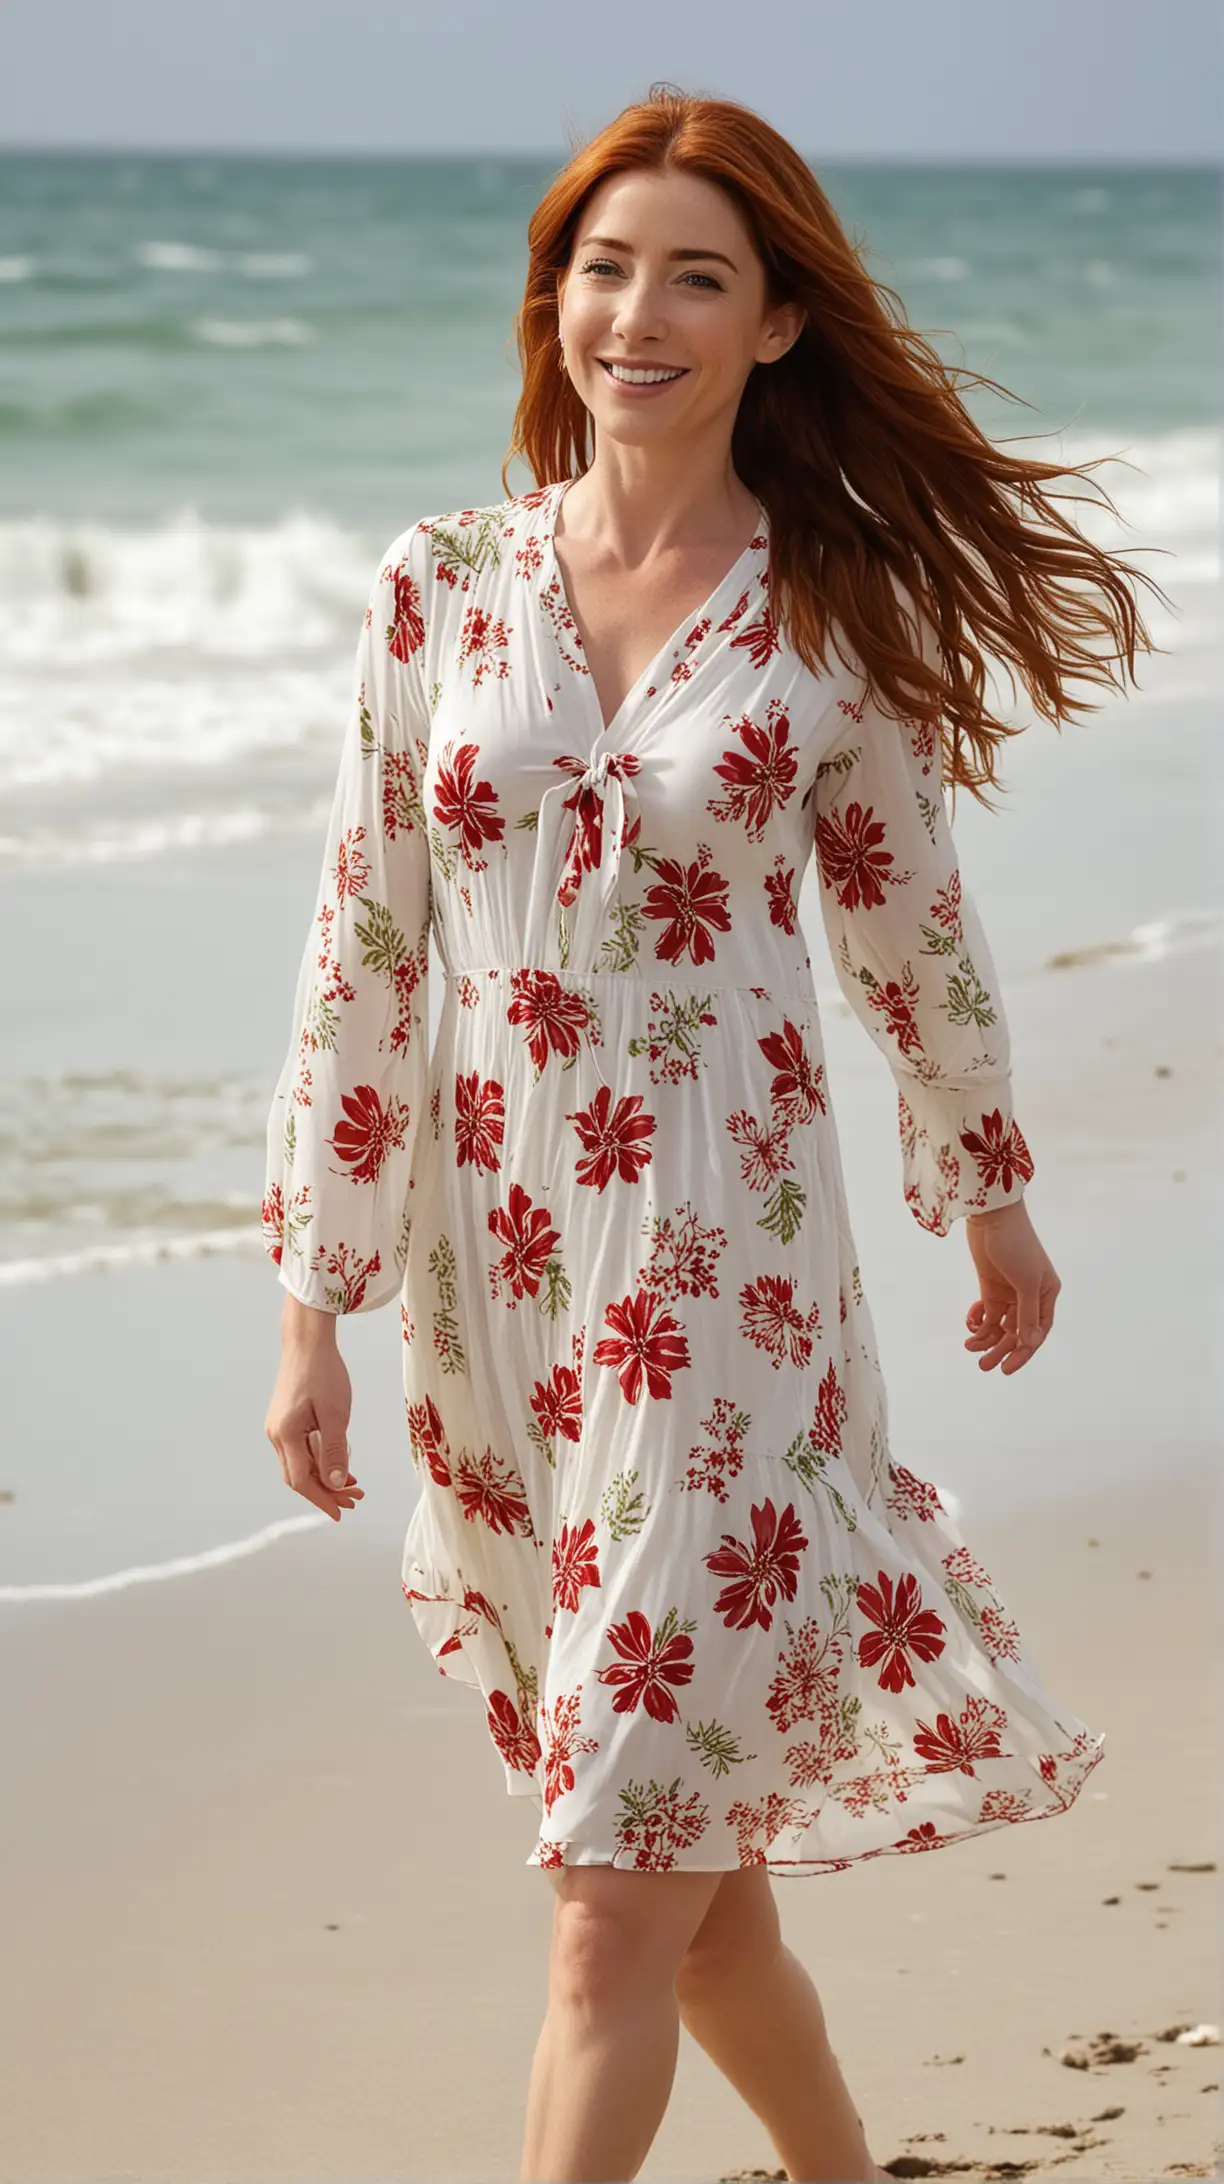 Slim Woman in Tropical Dress Smiling at the Beach